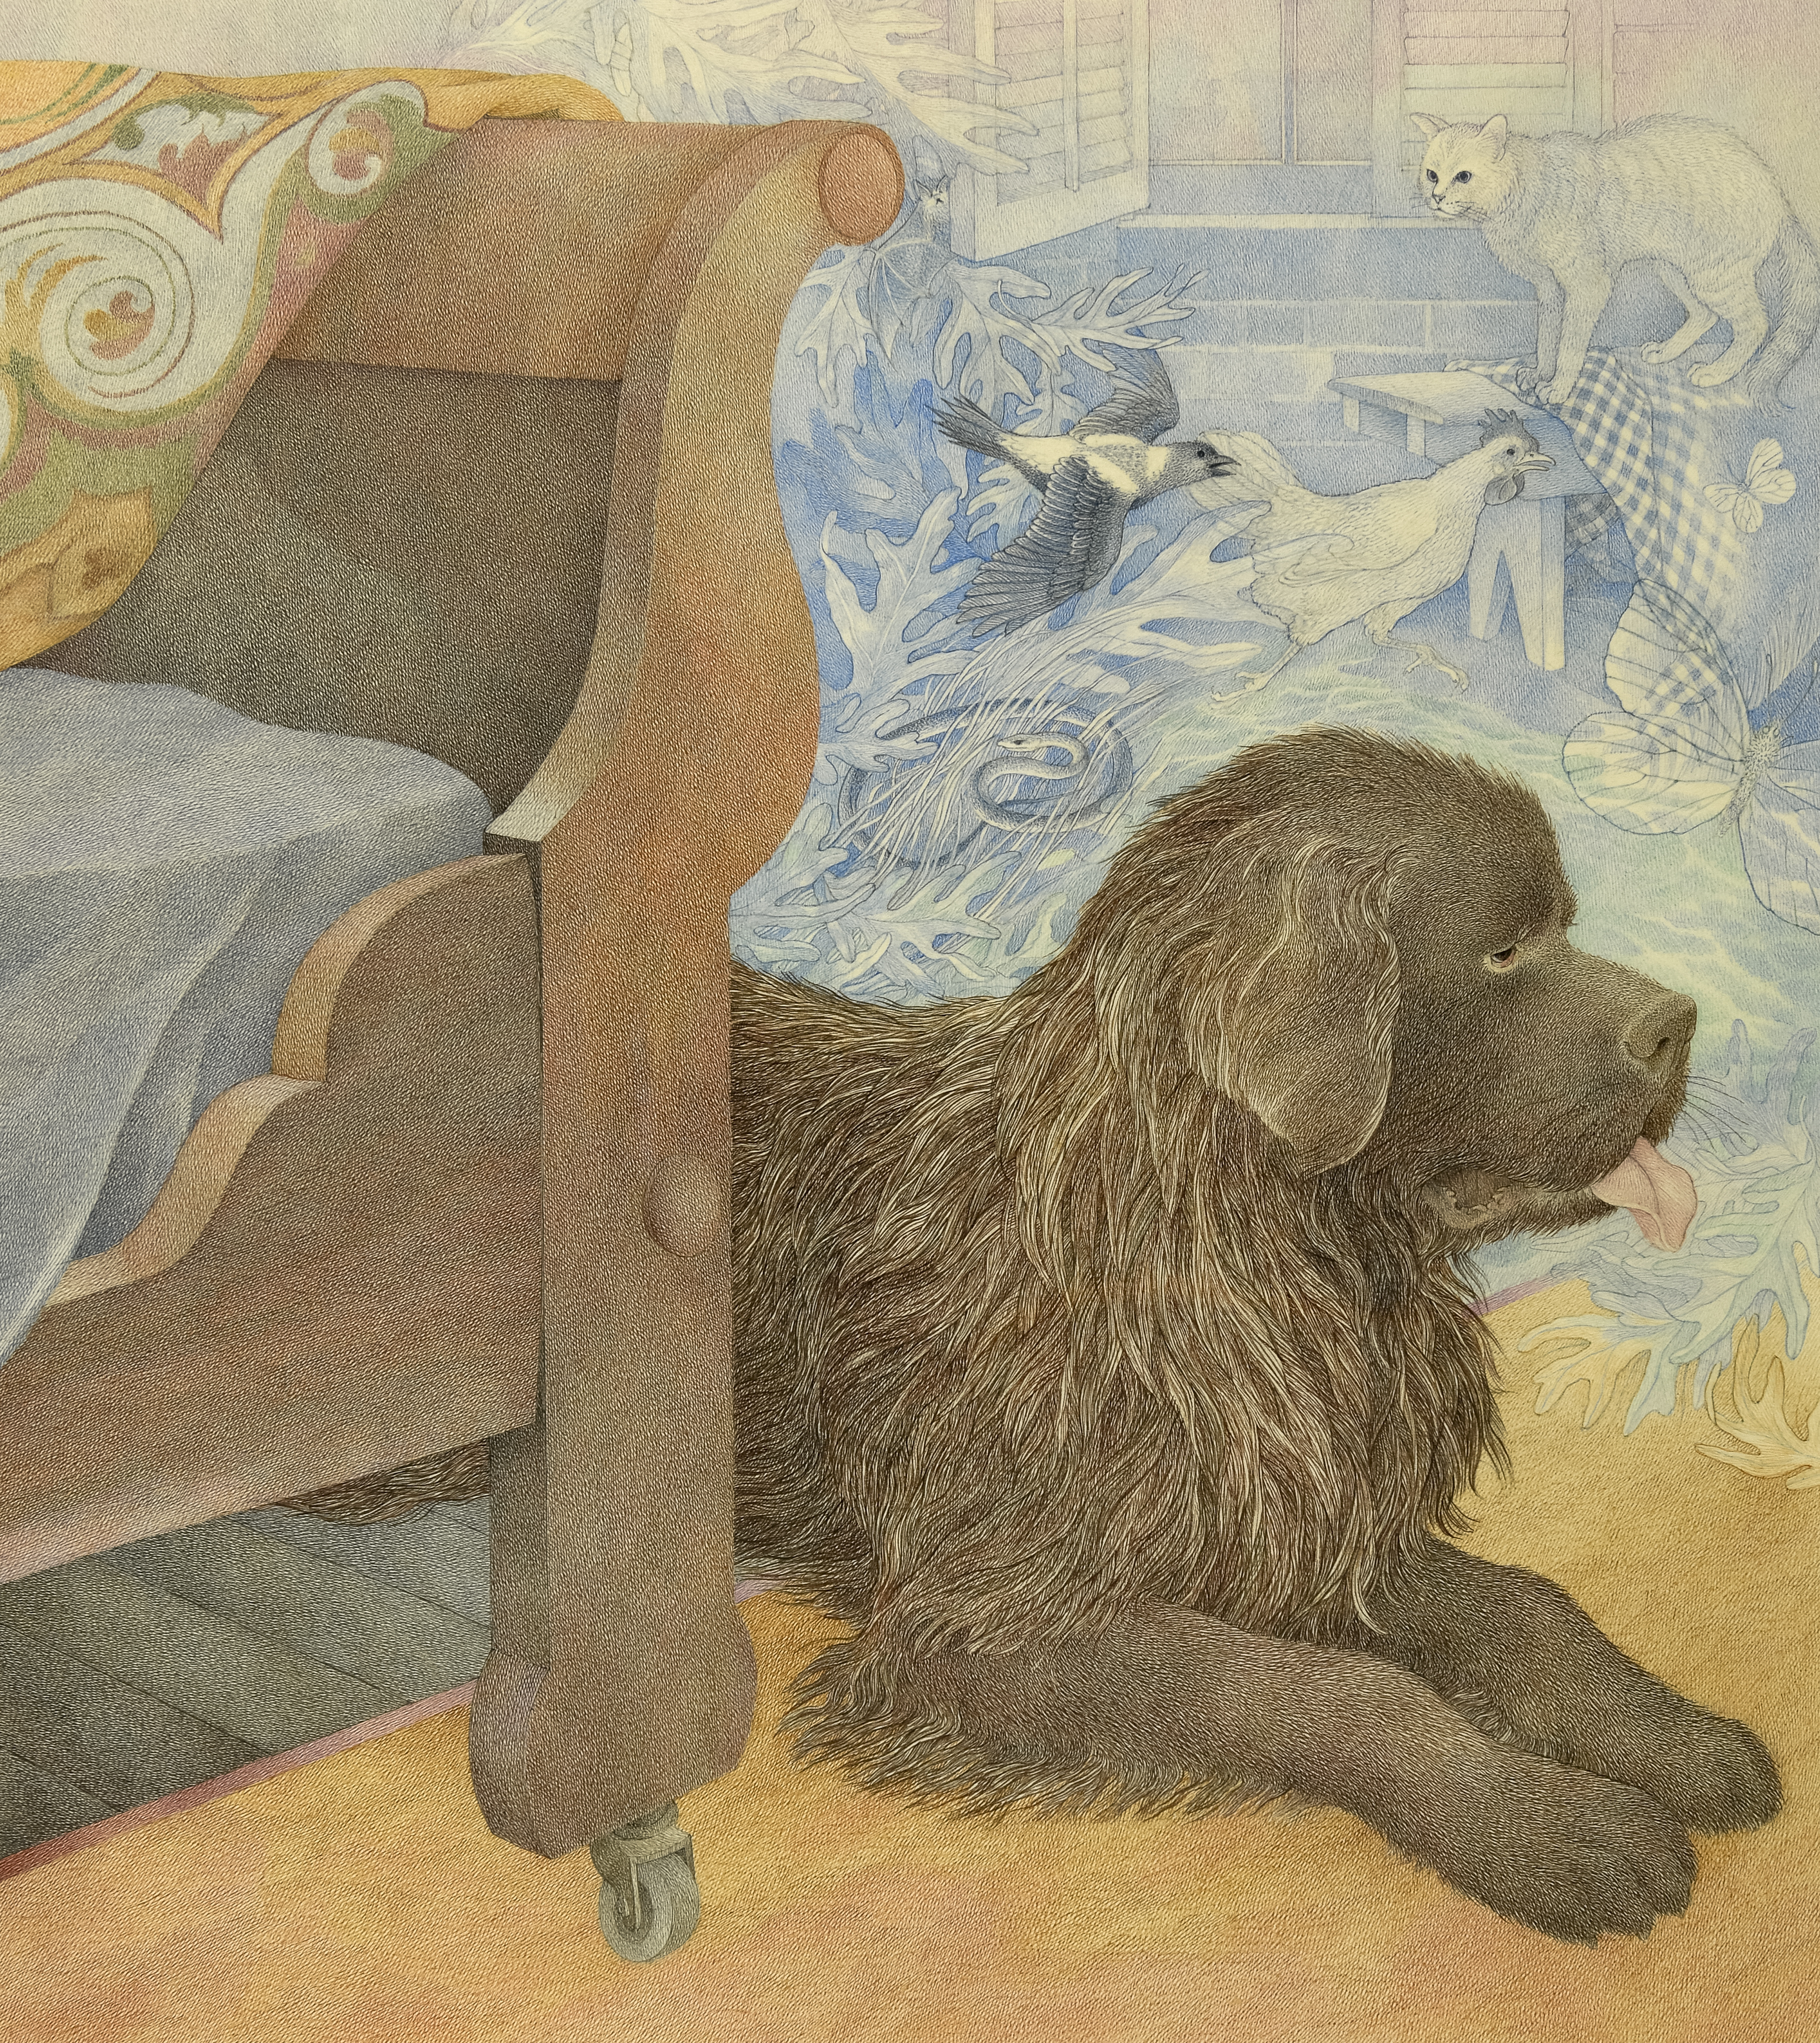 Illustration of a dog sitting at the foot of a sleigh bed.